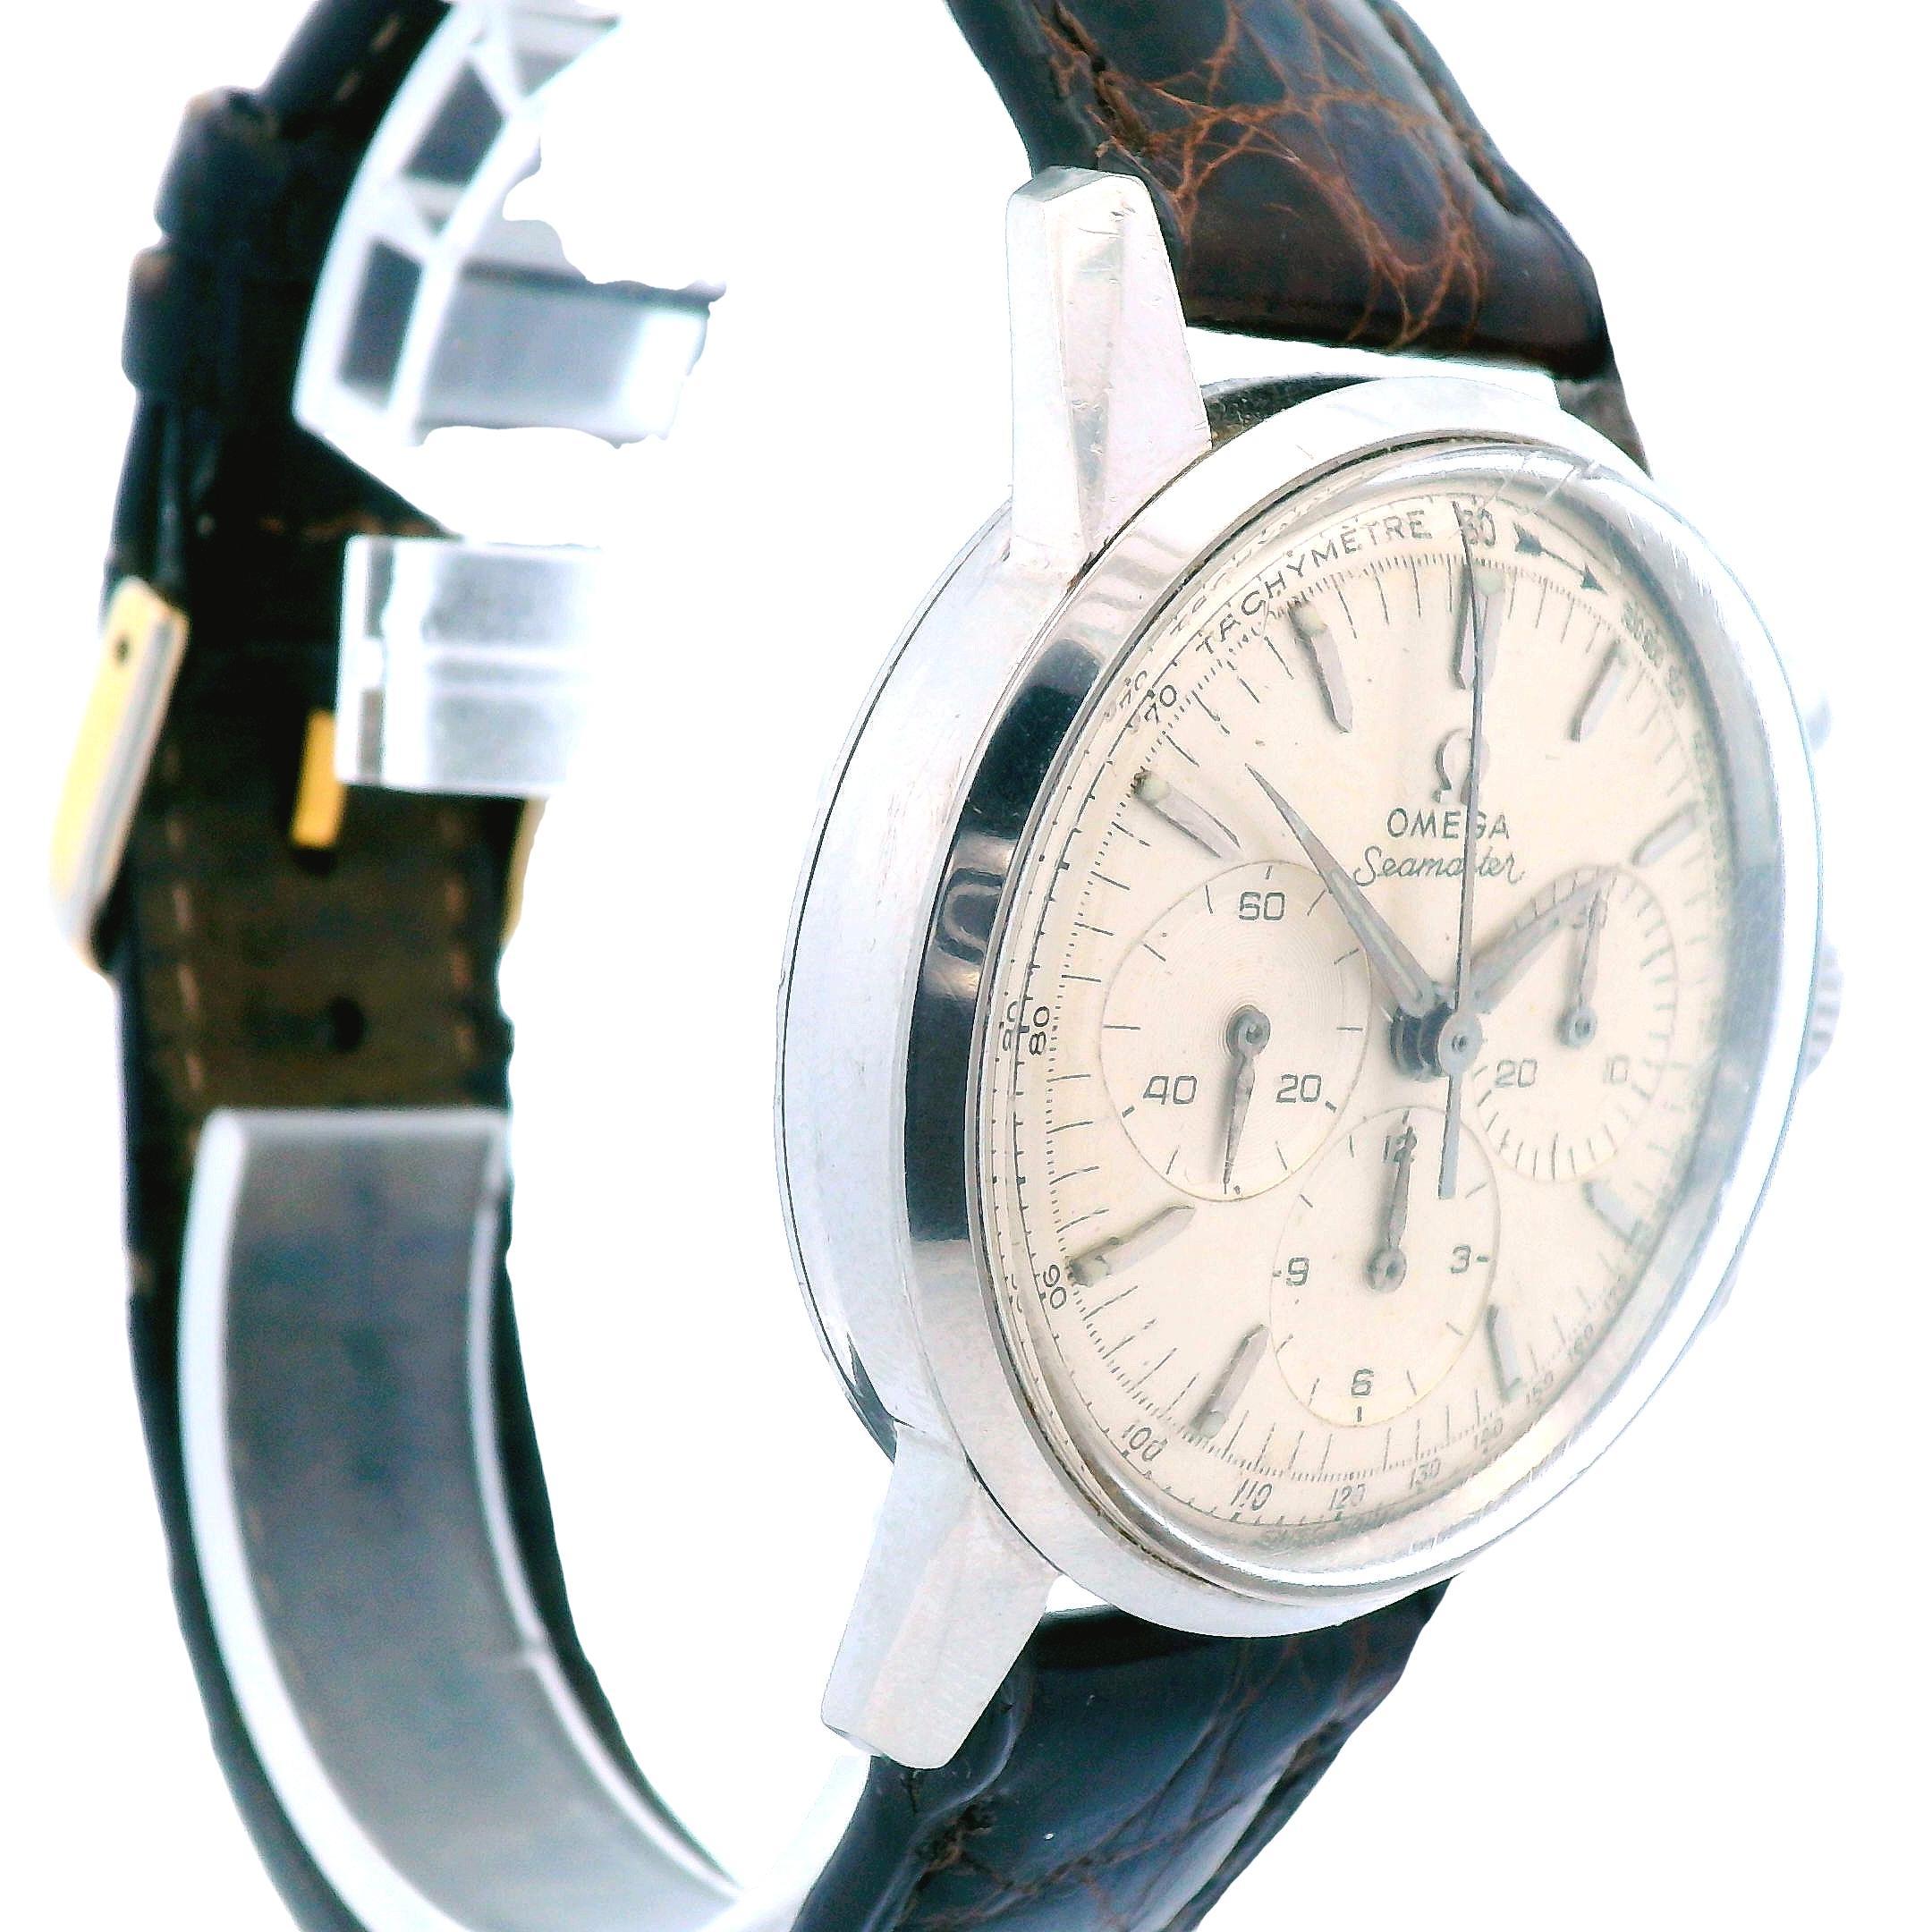 1960s Omega Seamaster Chronograph Watch in Stainless Steel - Running For Sale 3